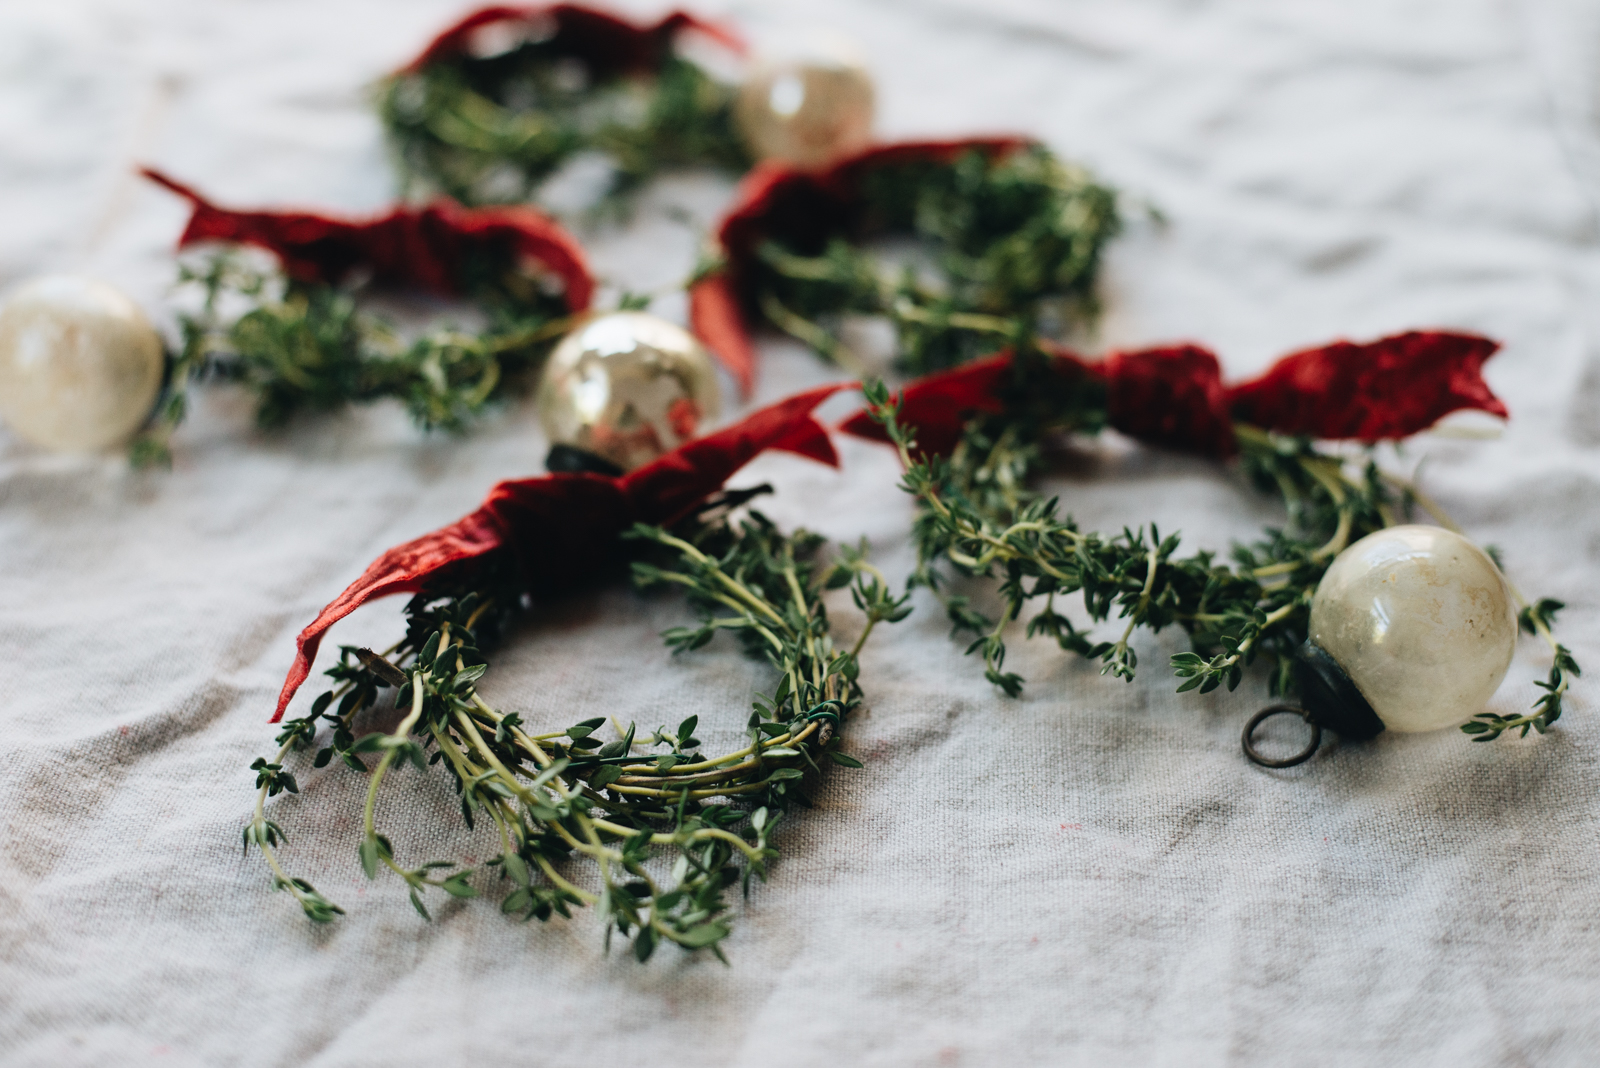 thyme mini wreaths with crushed red velvet and mercury ornaments